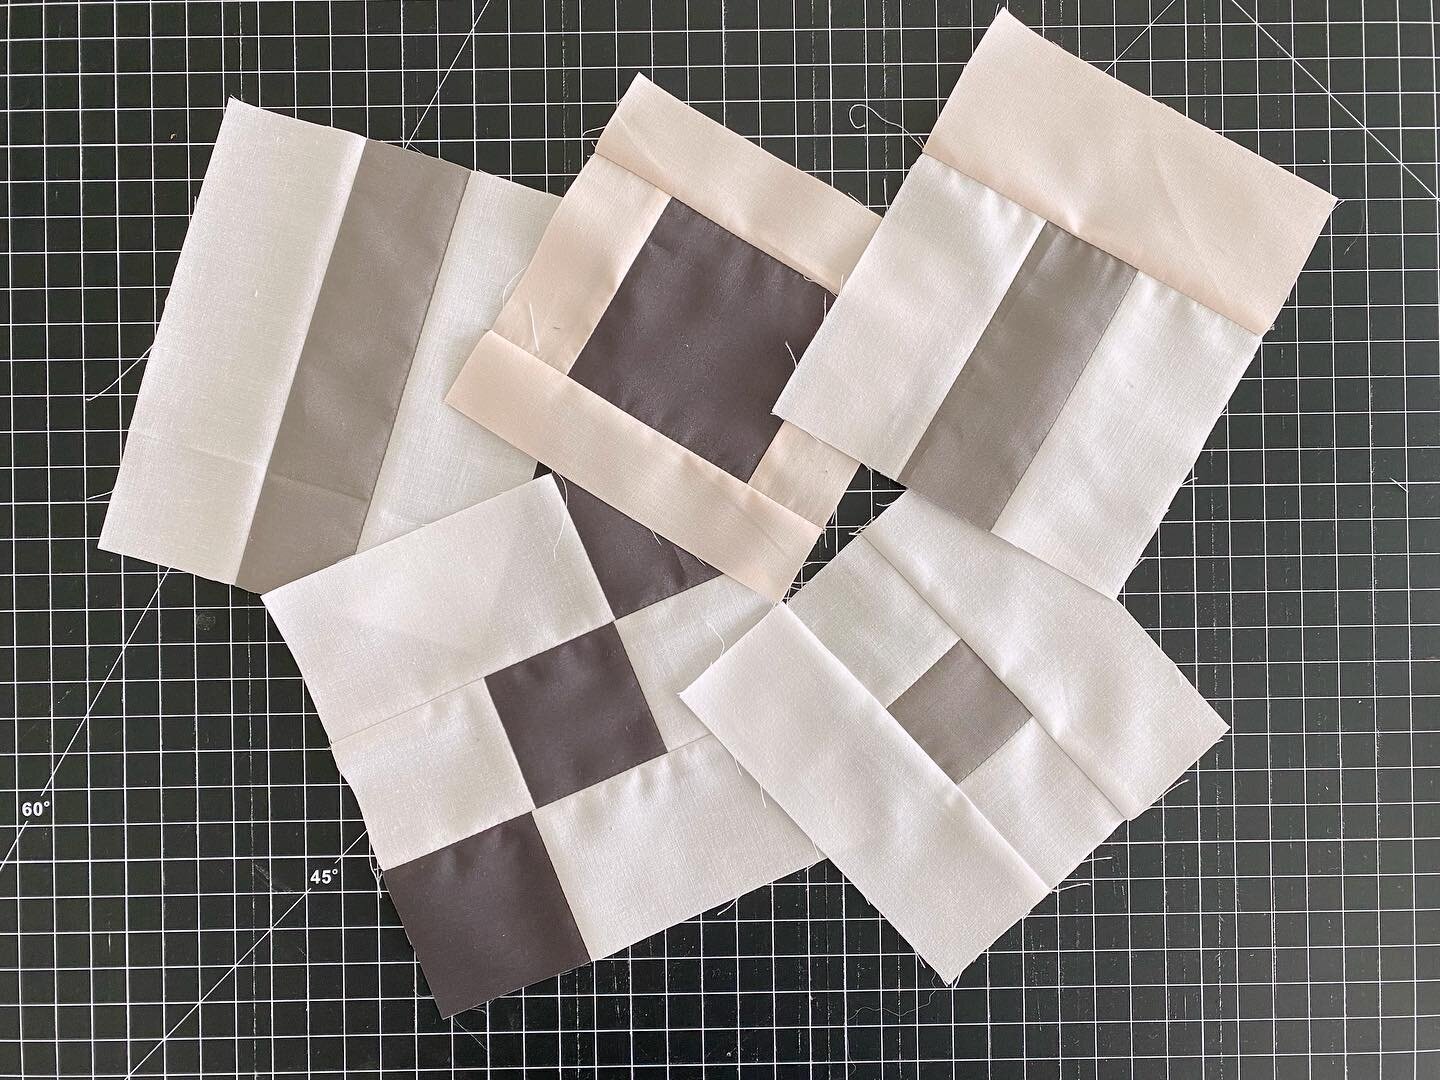 You can&rsquo;t tell by this picture but these little blocks are going to turn into the prettiest quilt you&rsquo;ve ever seen! 

#sennaquilt #alexandrabordallopatterns #rpqsmakes #modernquilting #modernquilter #quilting #quiltersofinstagram #quilter